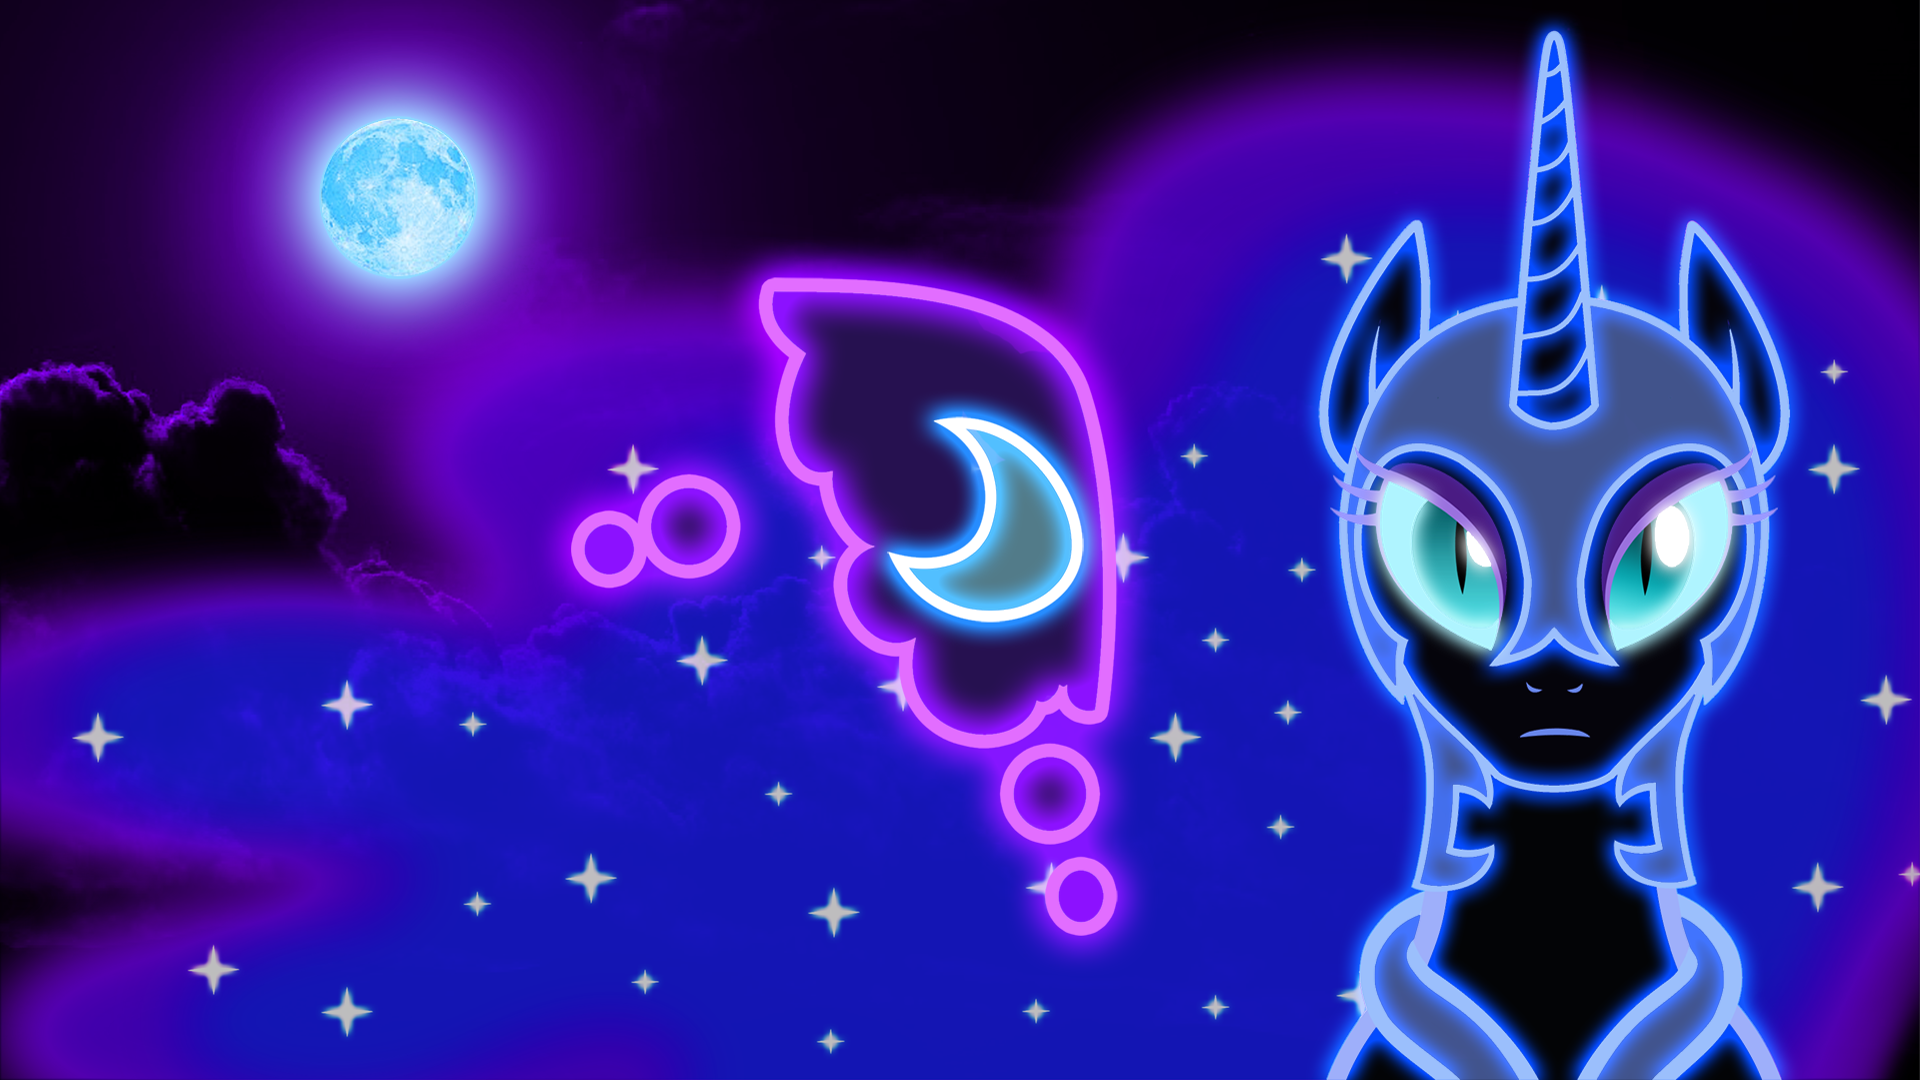 Wallpaper Neon My Little Pony Colecci N Personal